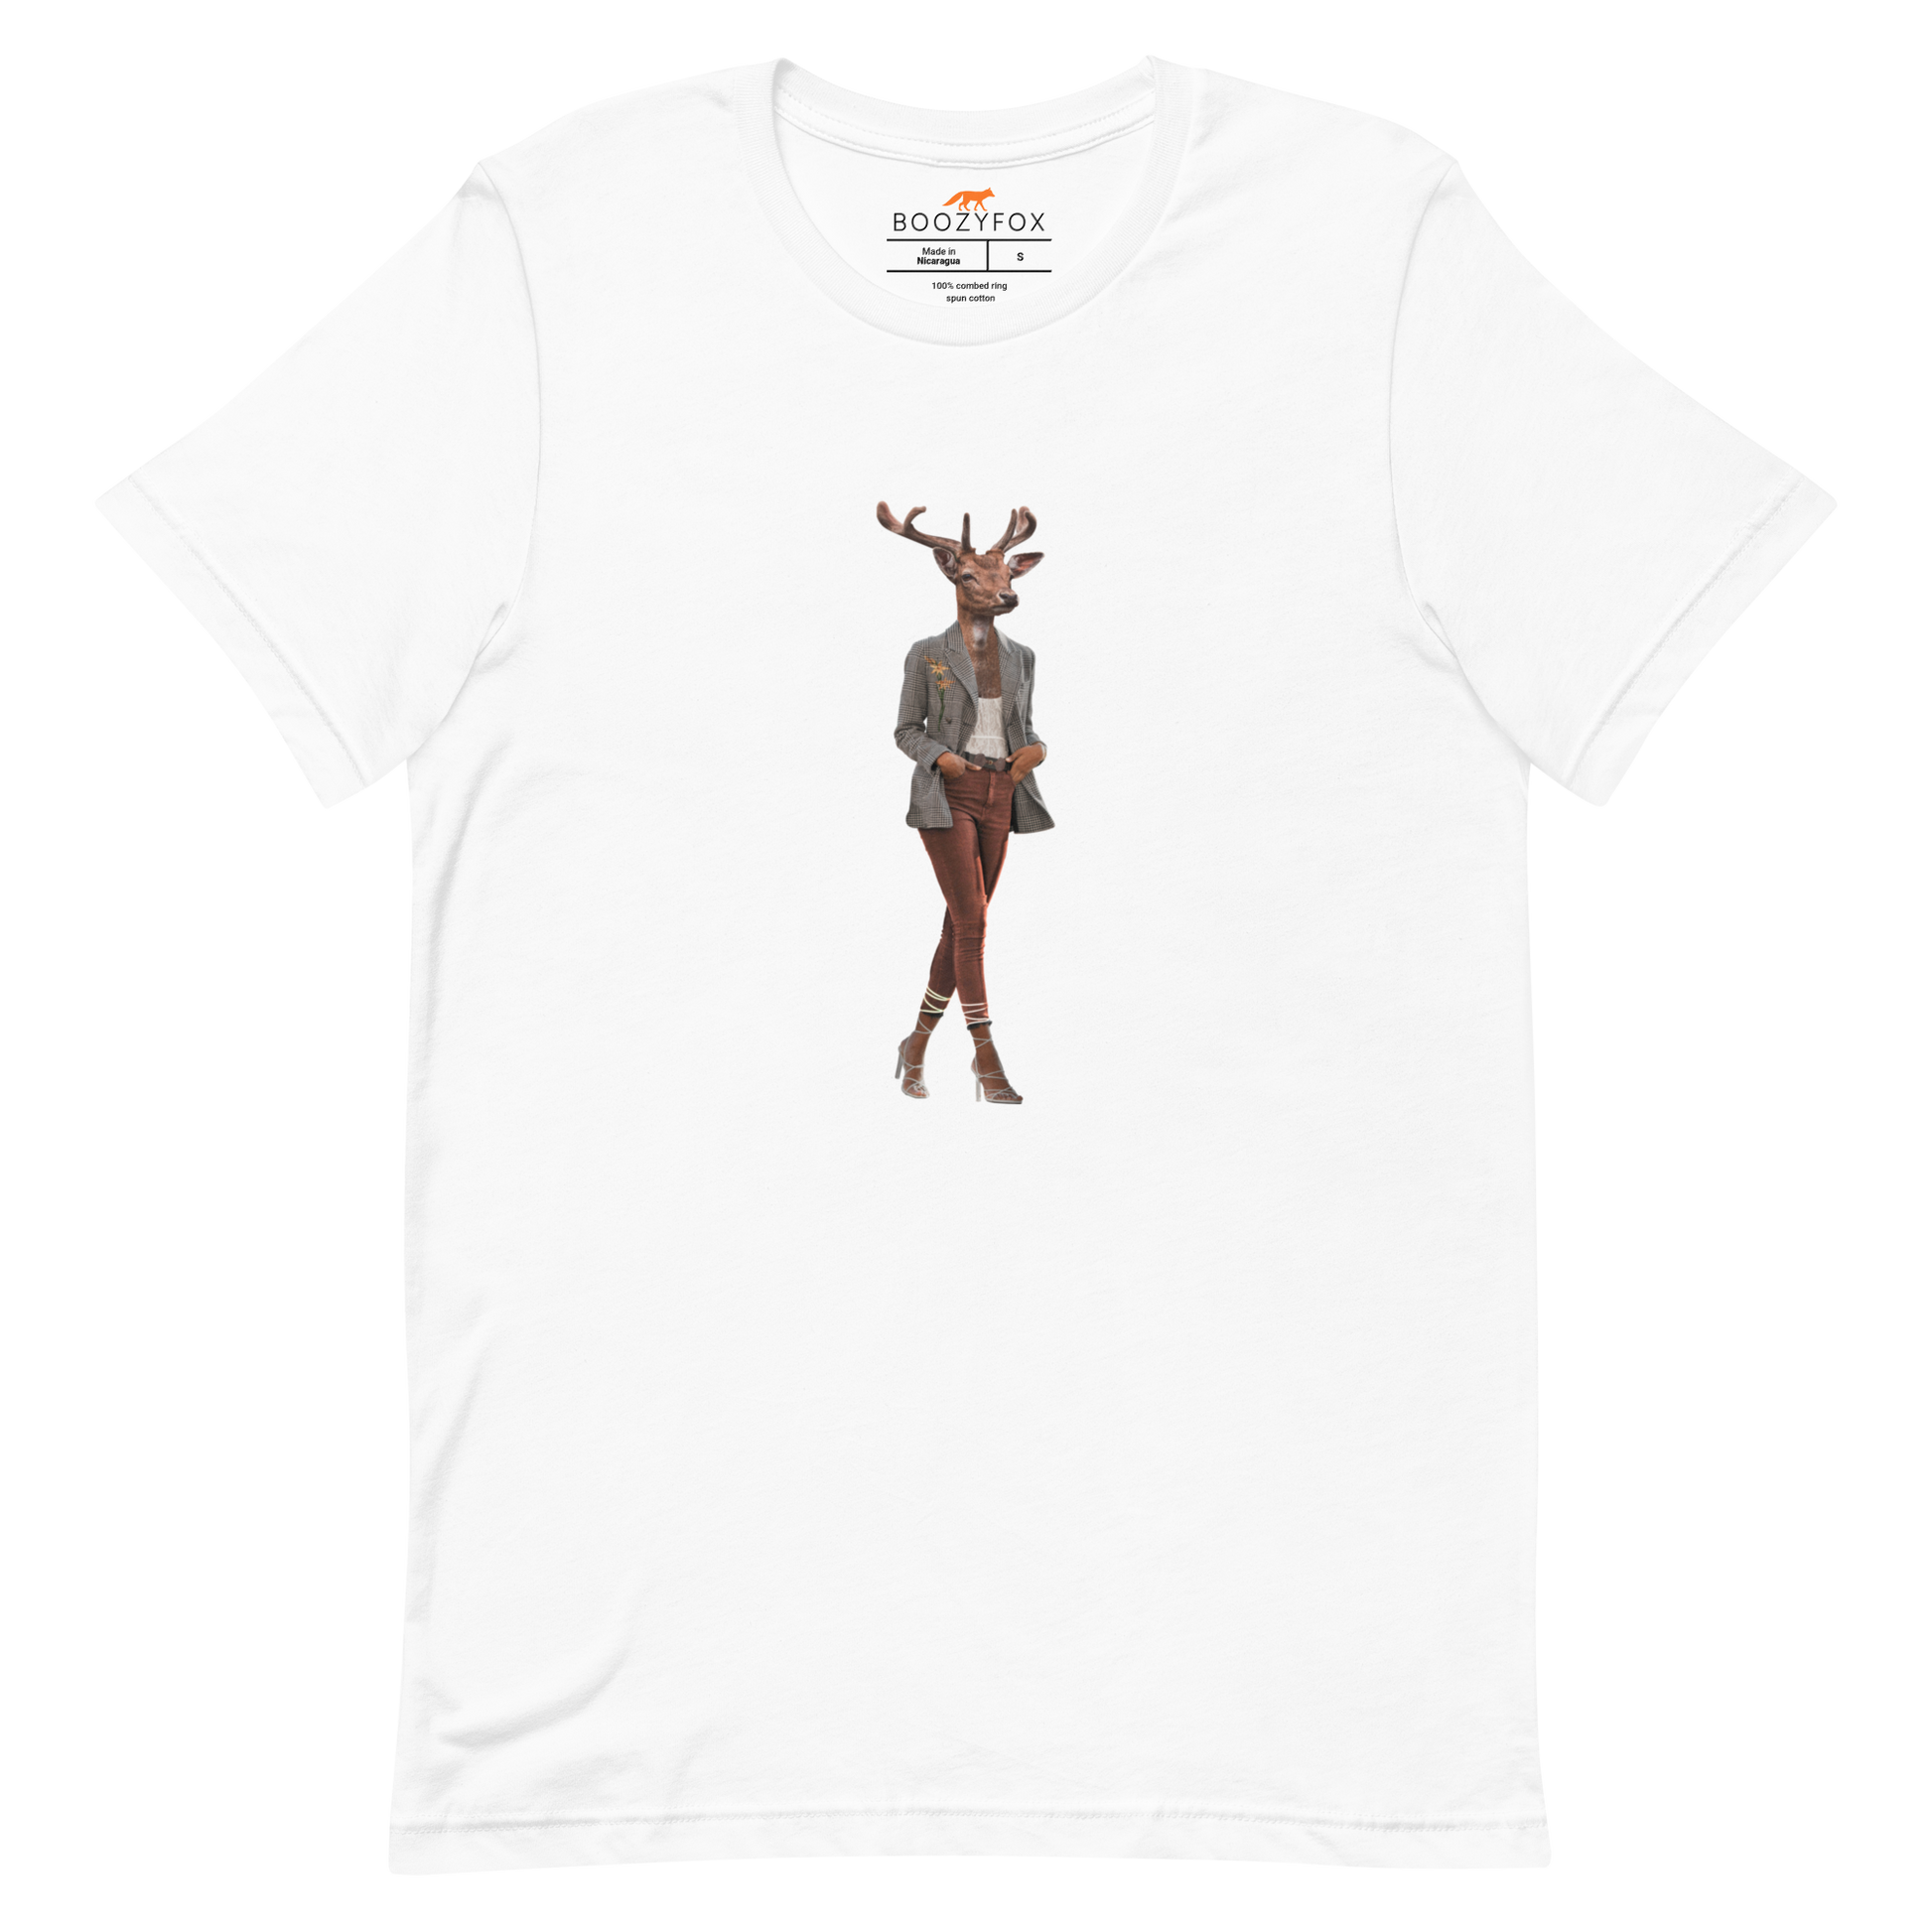 White Premium Deer T-Shirt featuring an Anthropomorphic Deer graphic on the chest - Funny Graphic Deer Tees - Boozy Fox